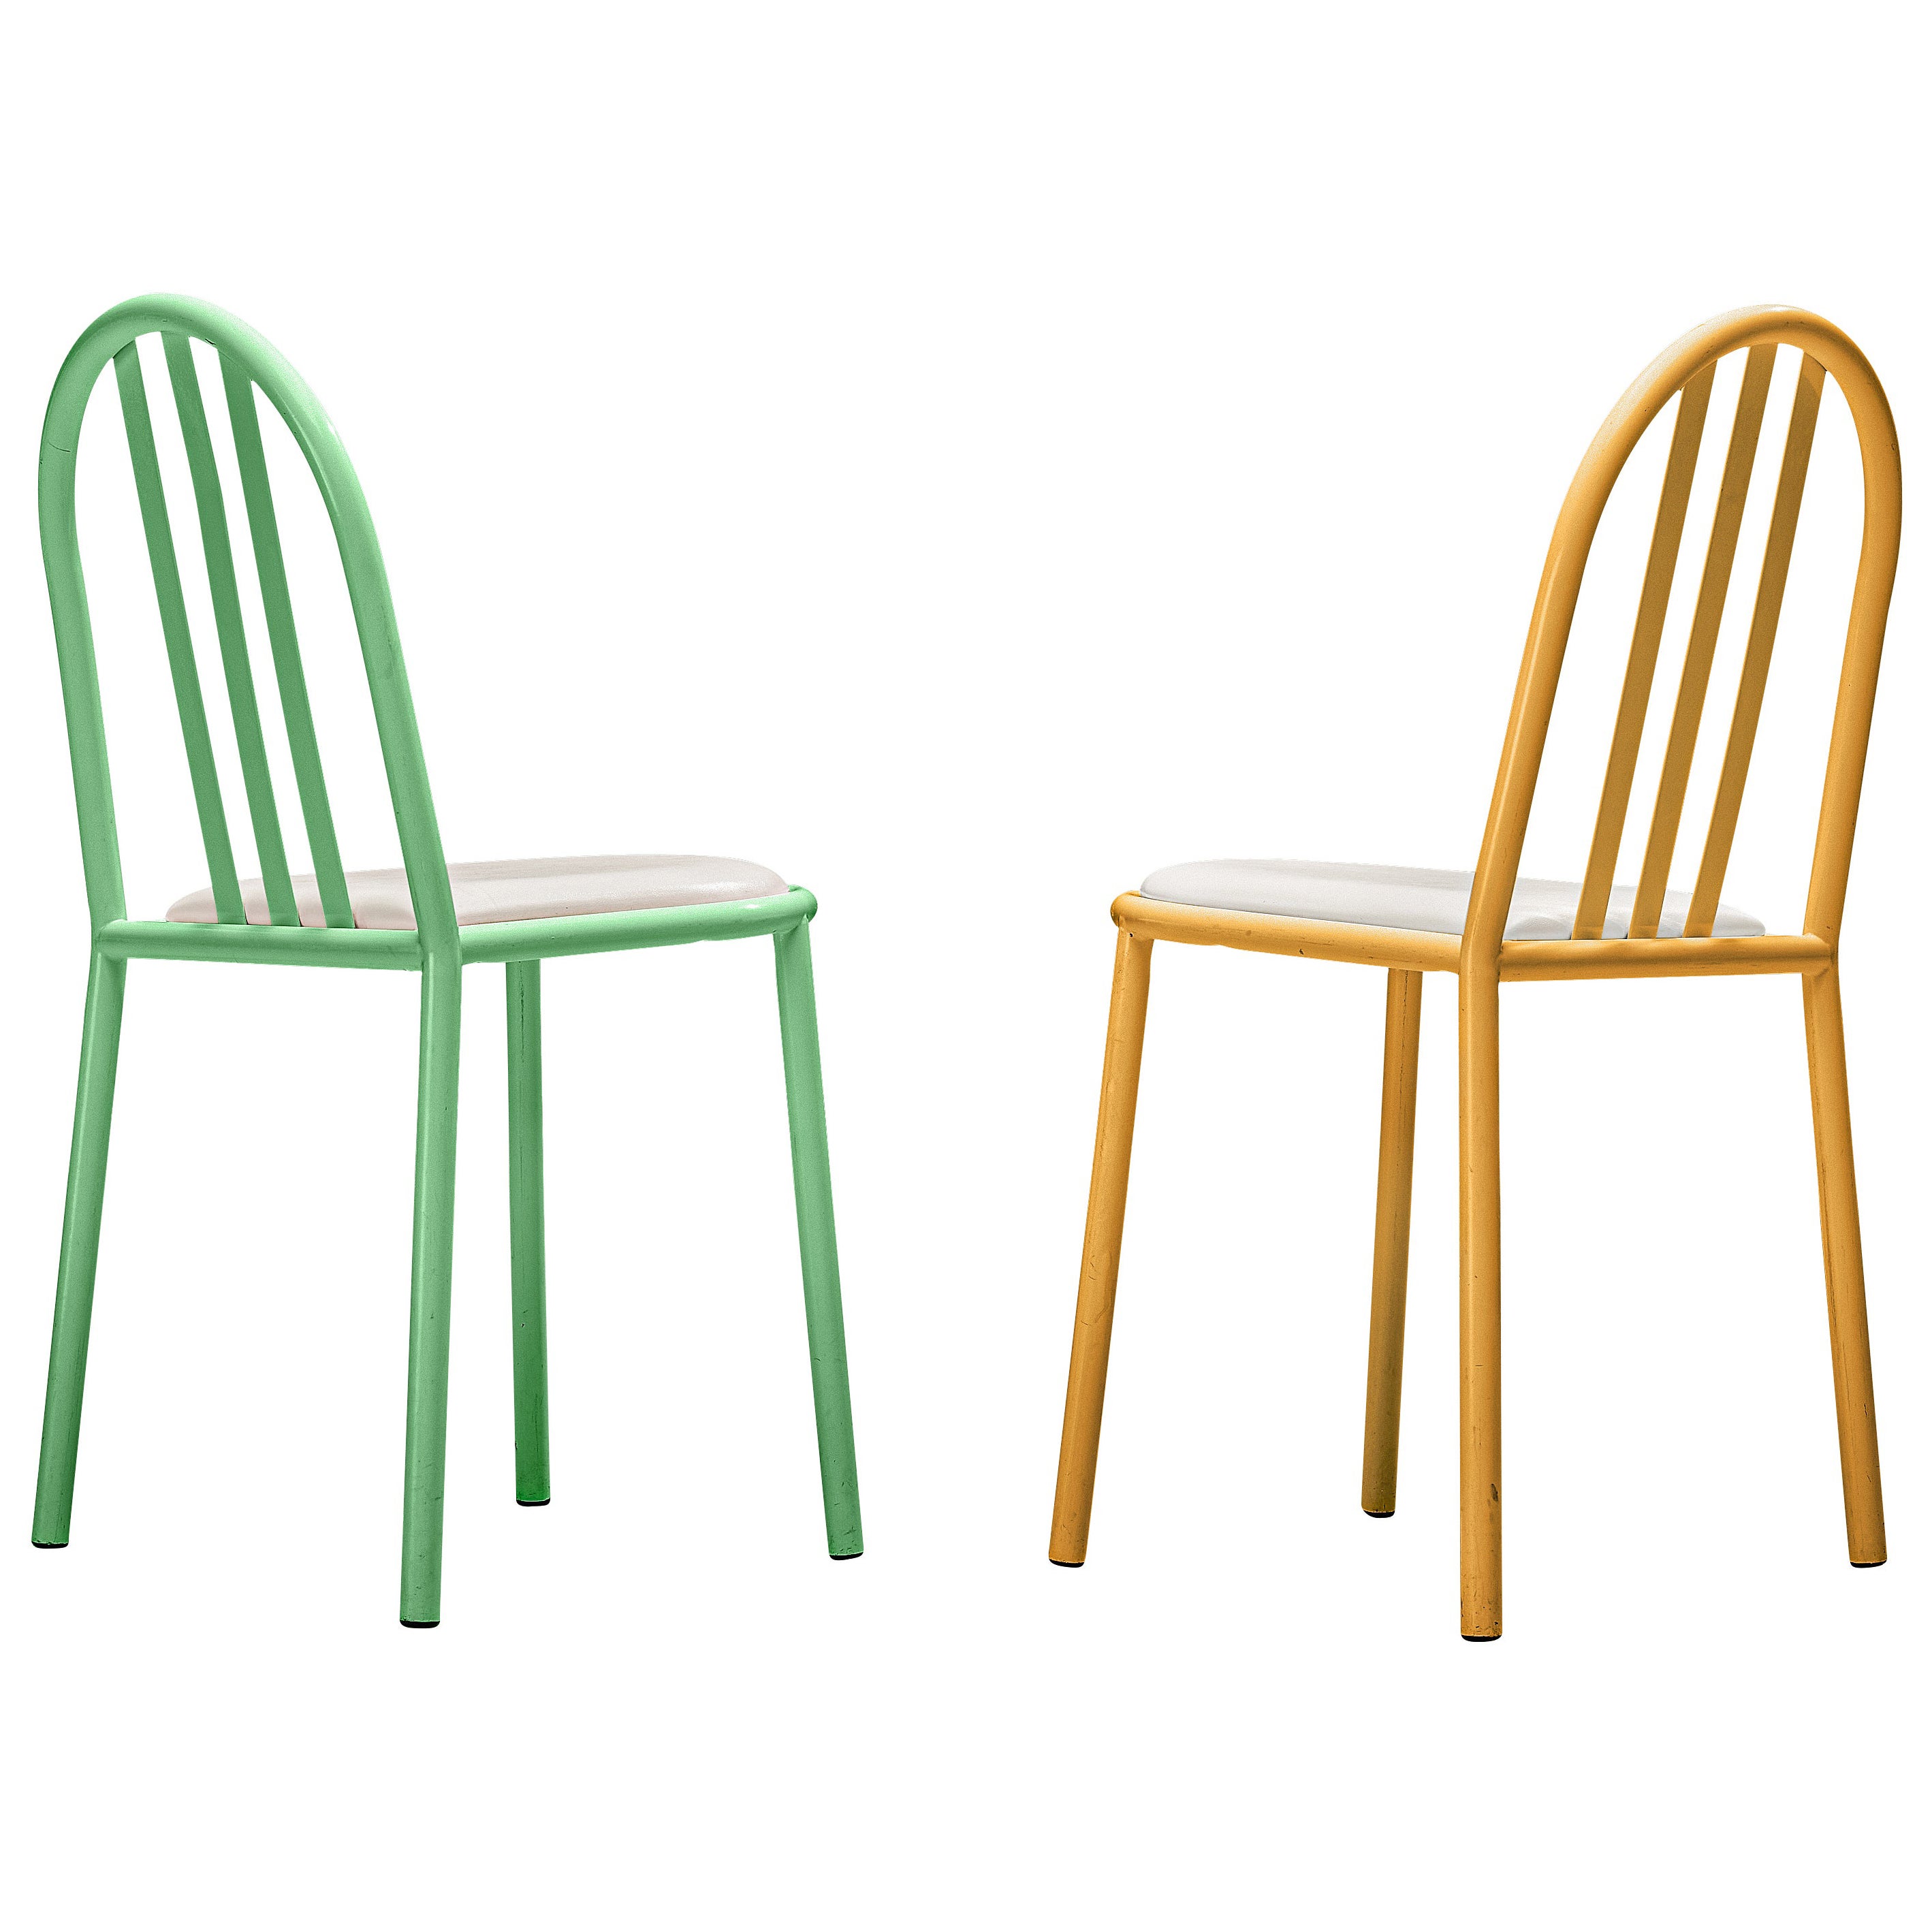 Robert Mallet-Stevens Dining Chairs Model '222' in Colourful Metal